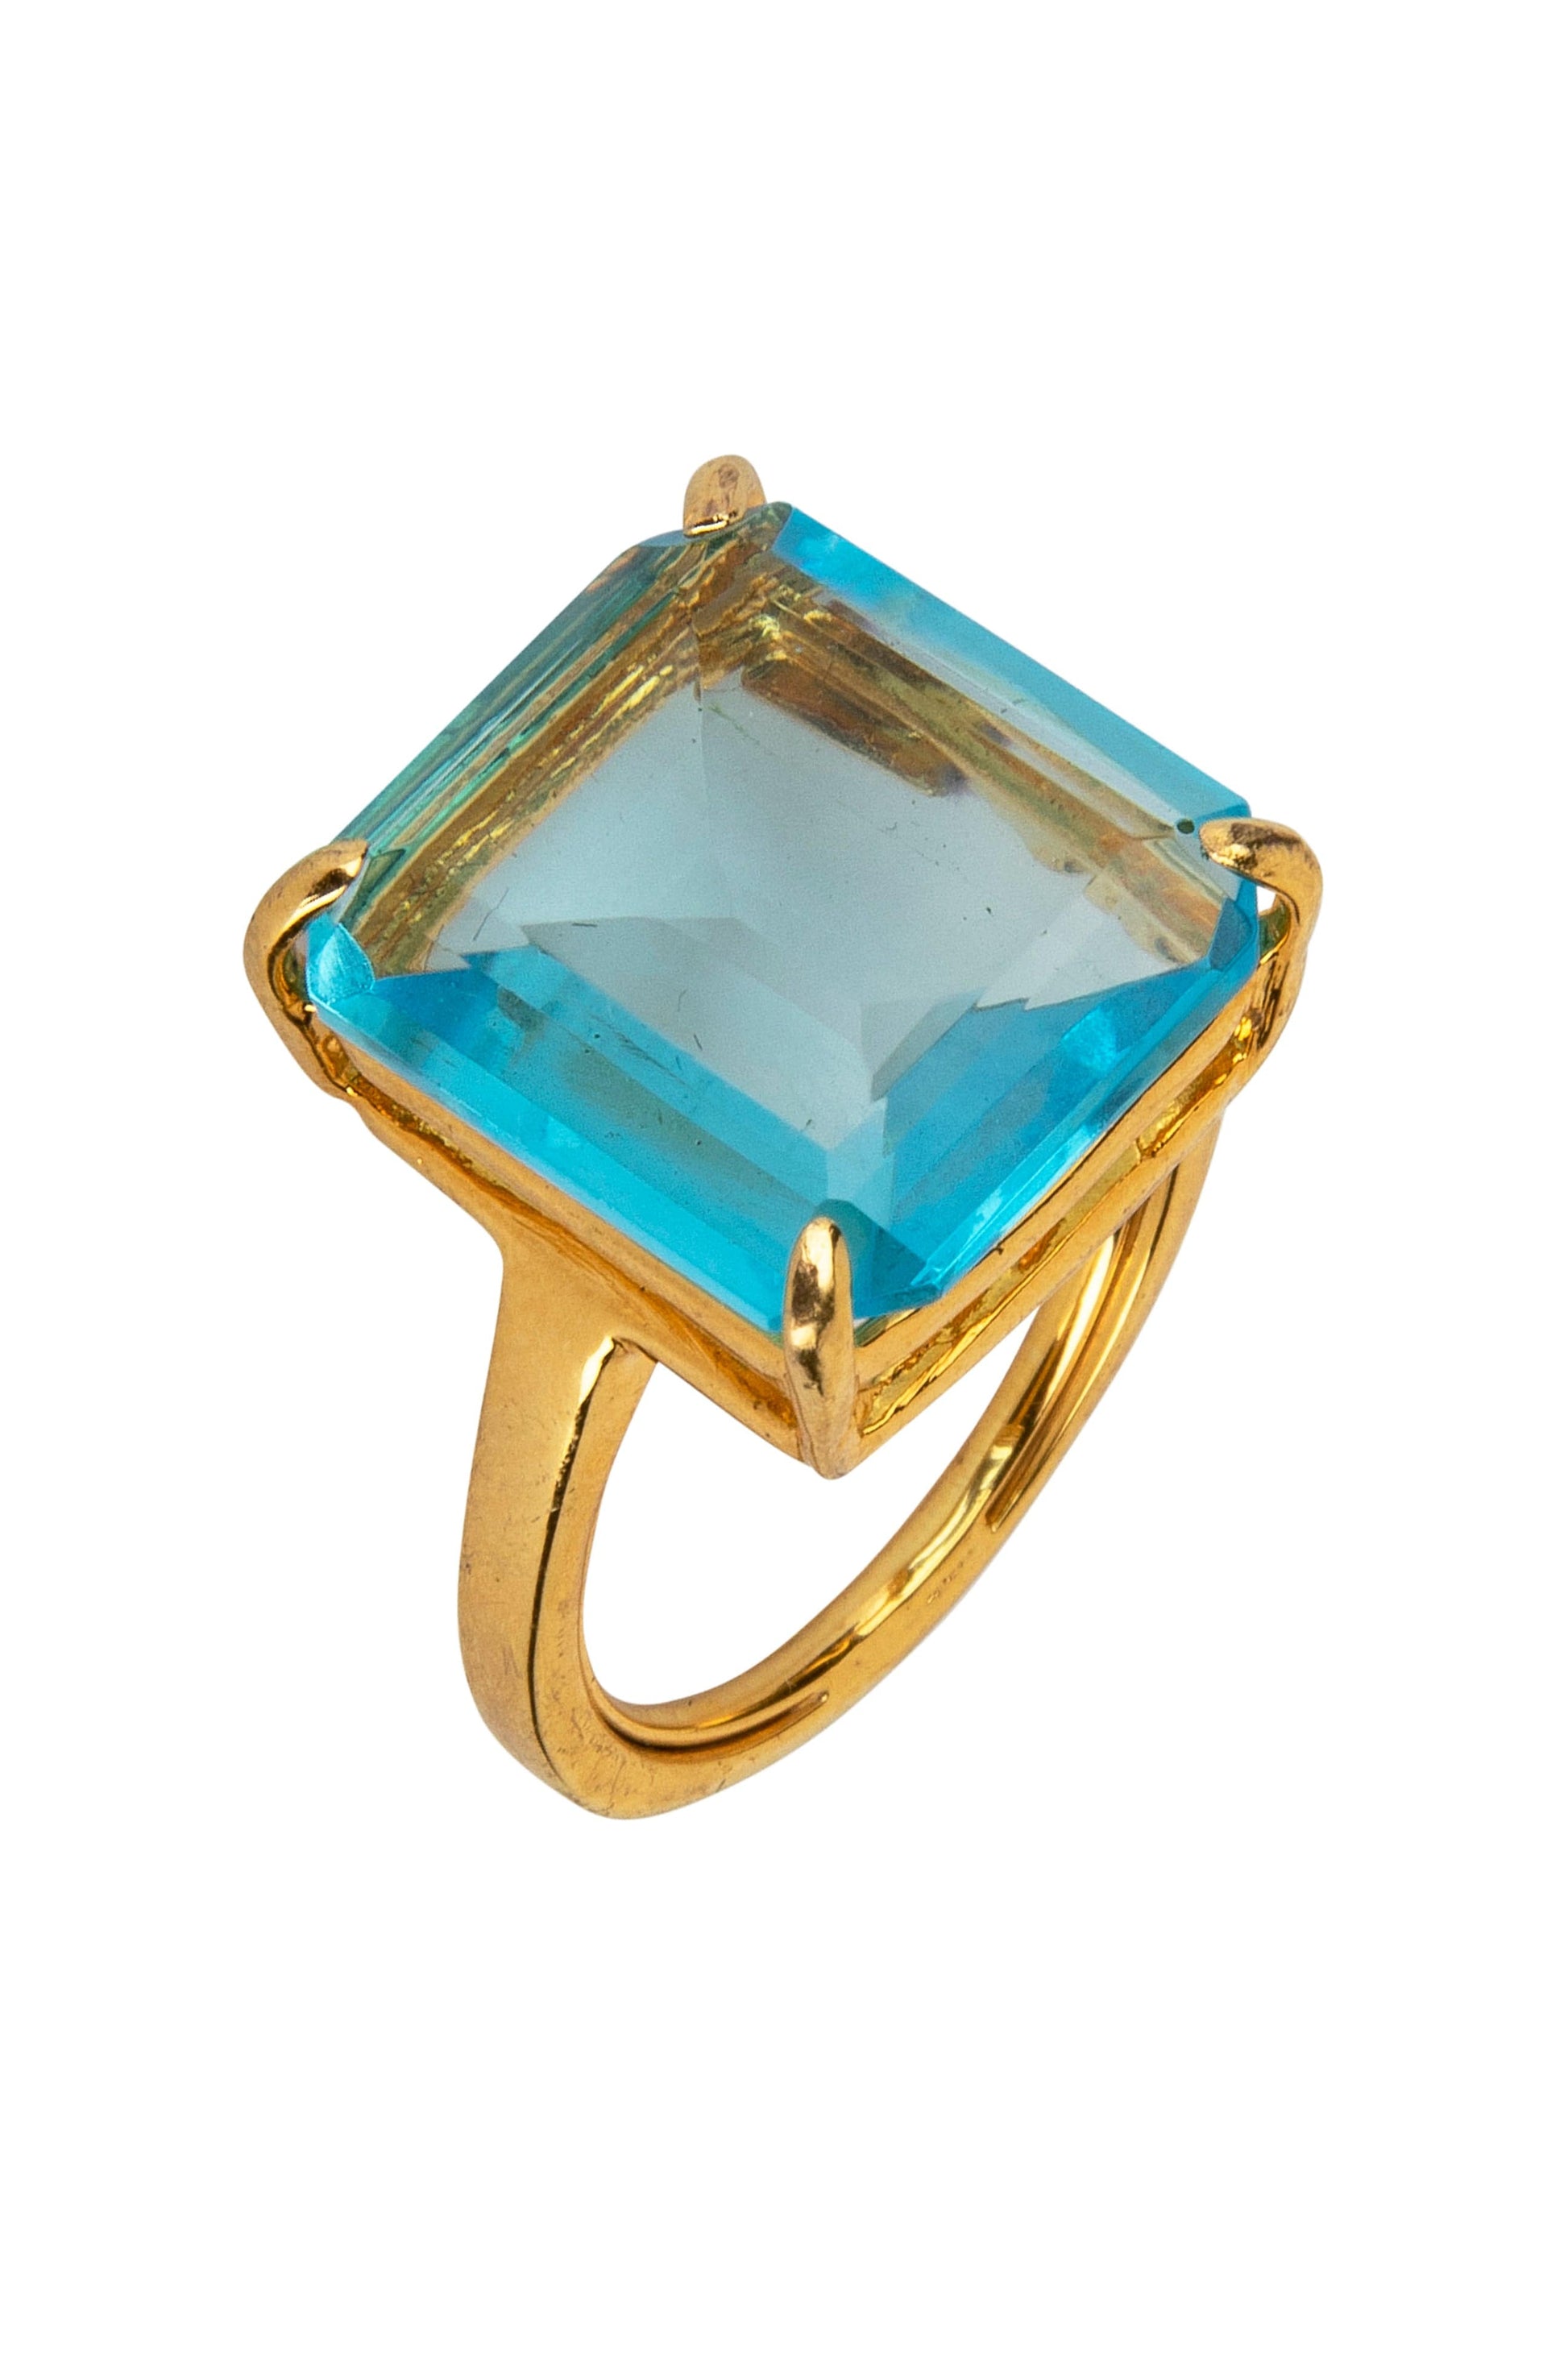 Emerald Cut Blue Topaz Ring JEWELRYBOUTIQUERING BOUNKIT JEWELRY   